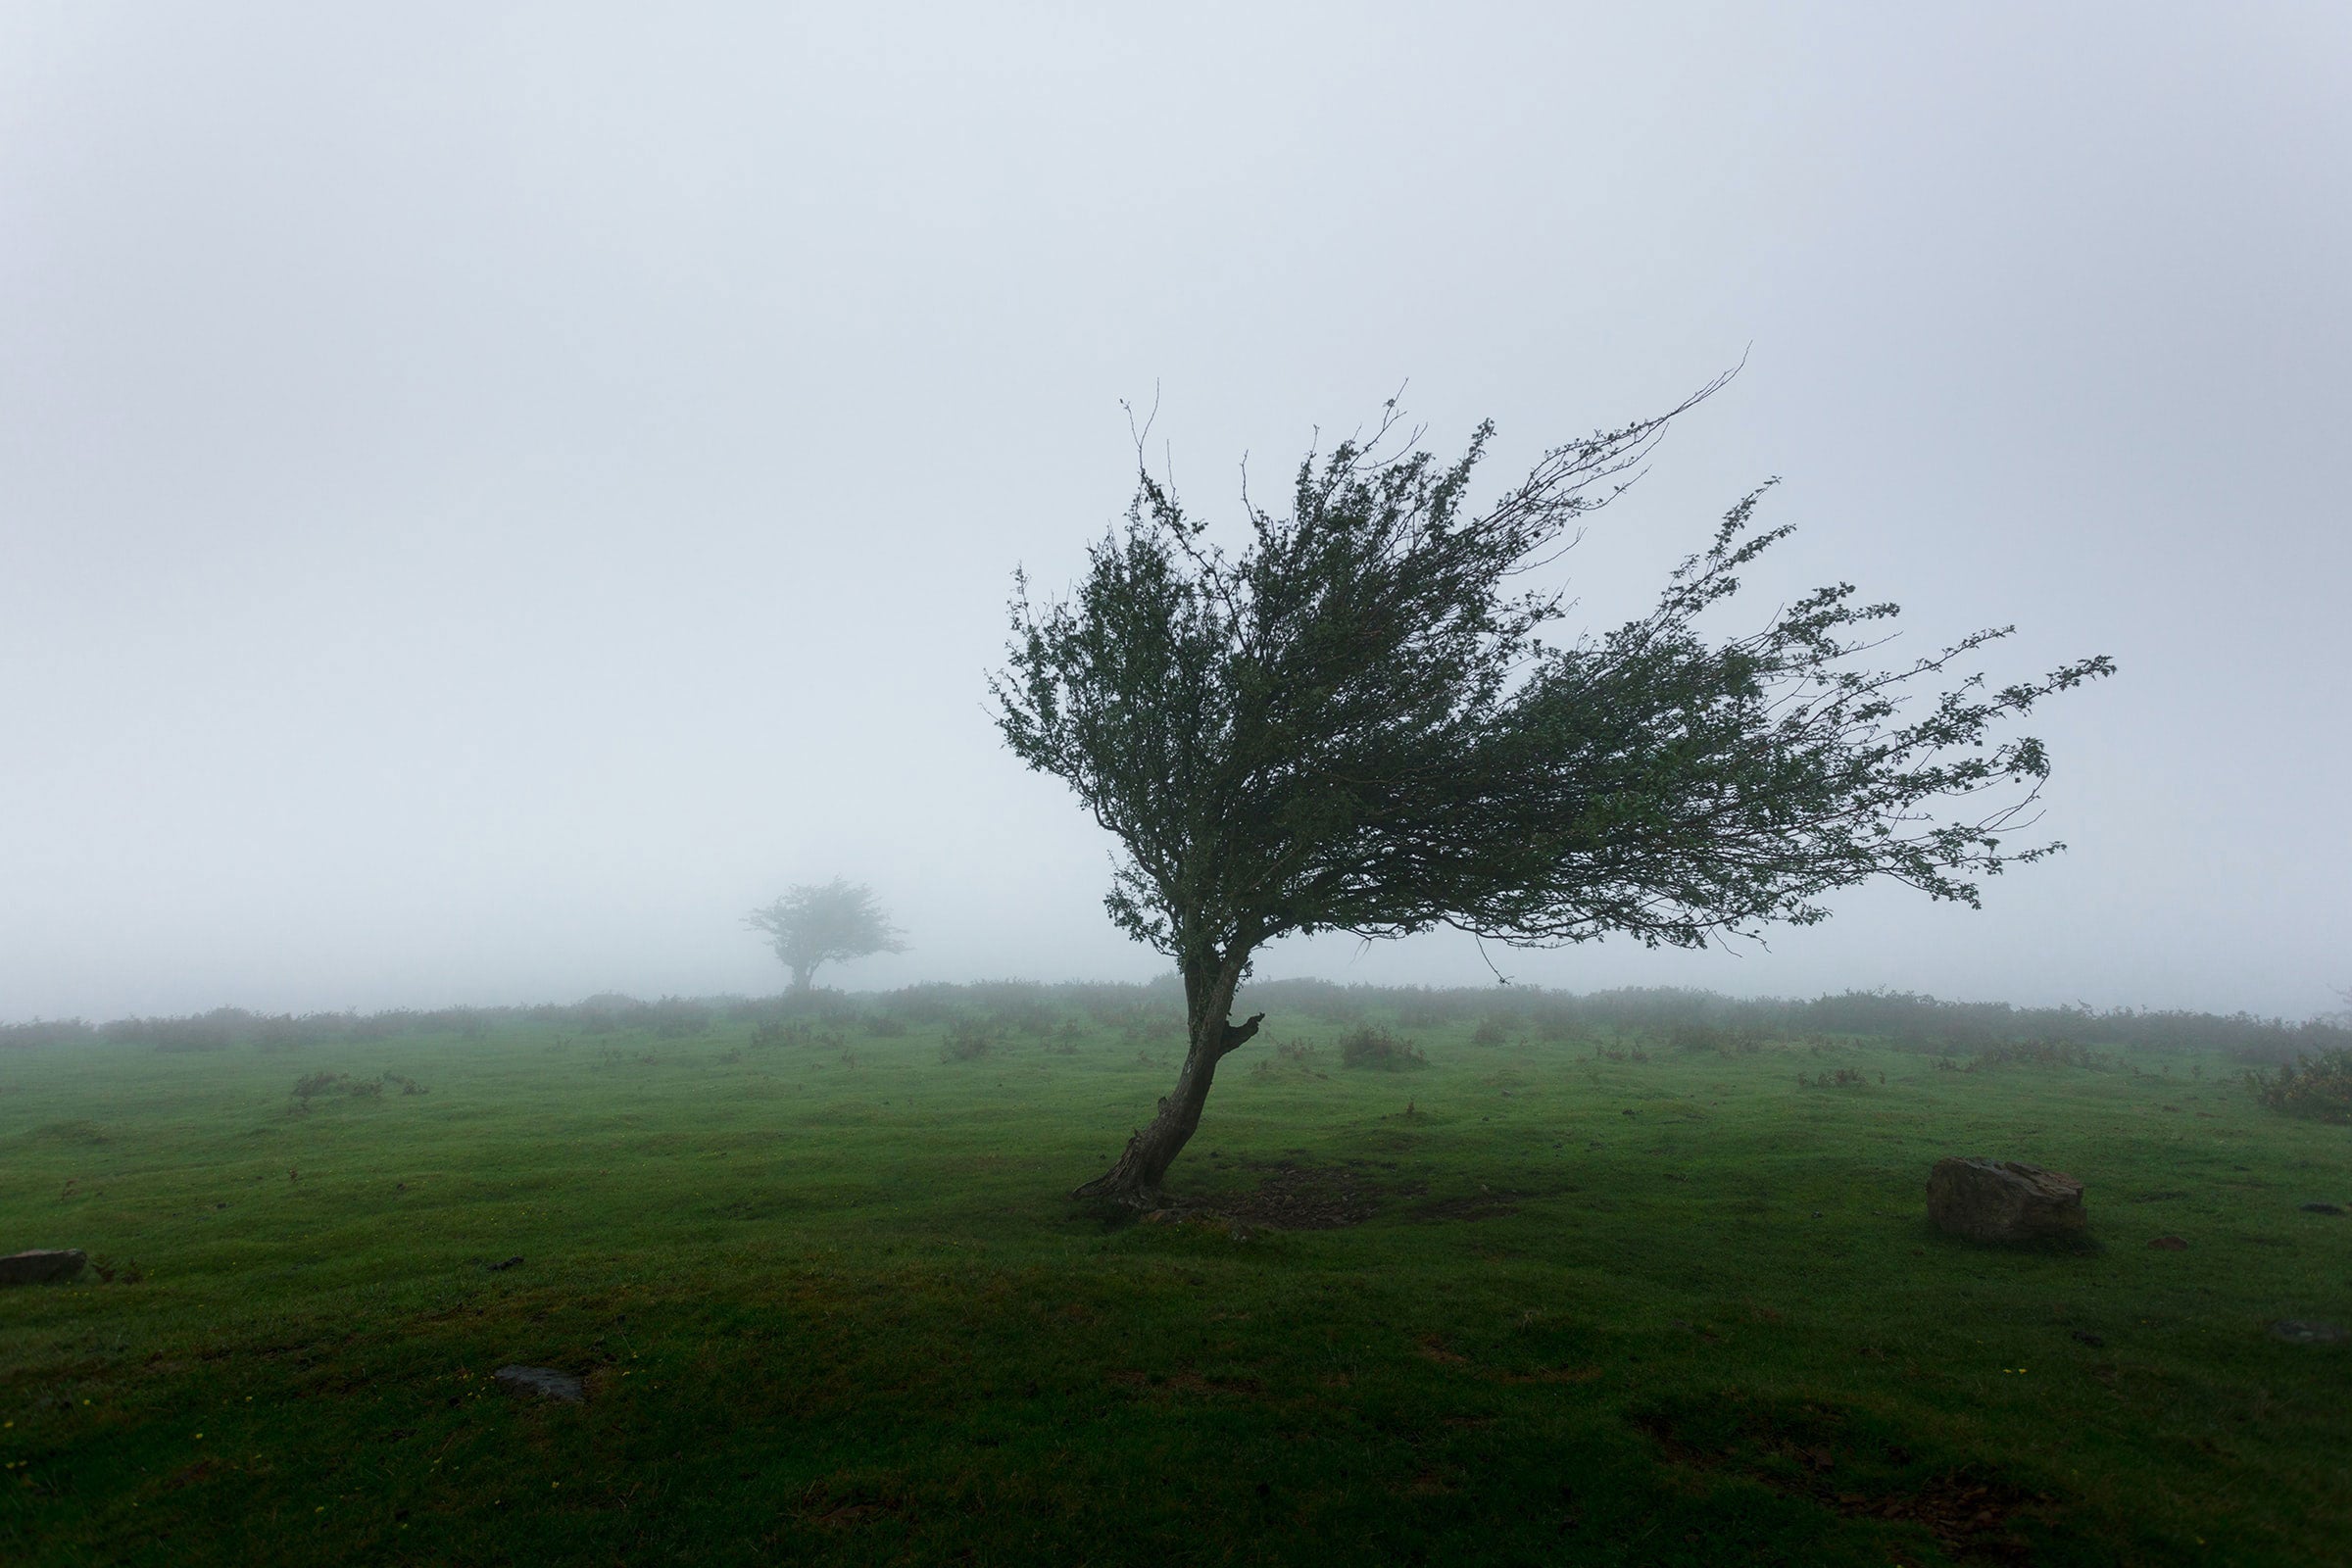 A tree bending in the stormy wind